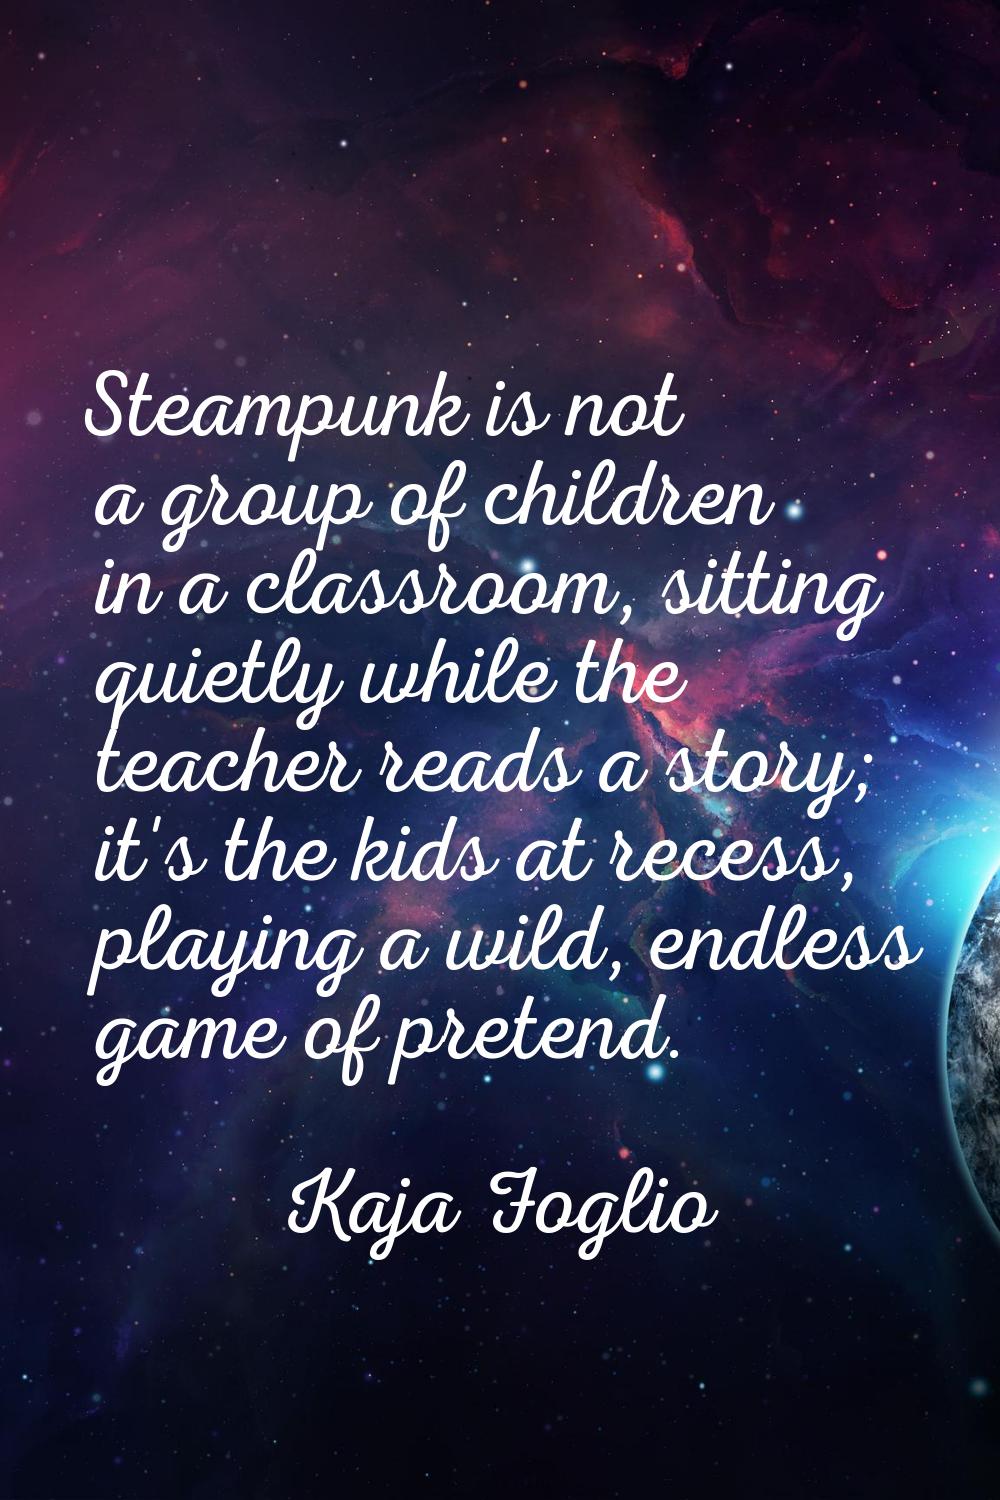 Steampunk is not a group of children in a classroom, sitting quietly while the teacher reads a stor